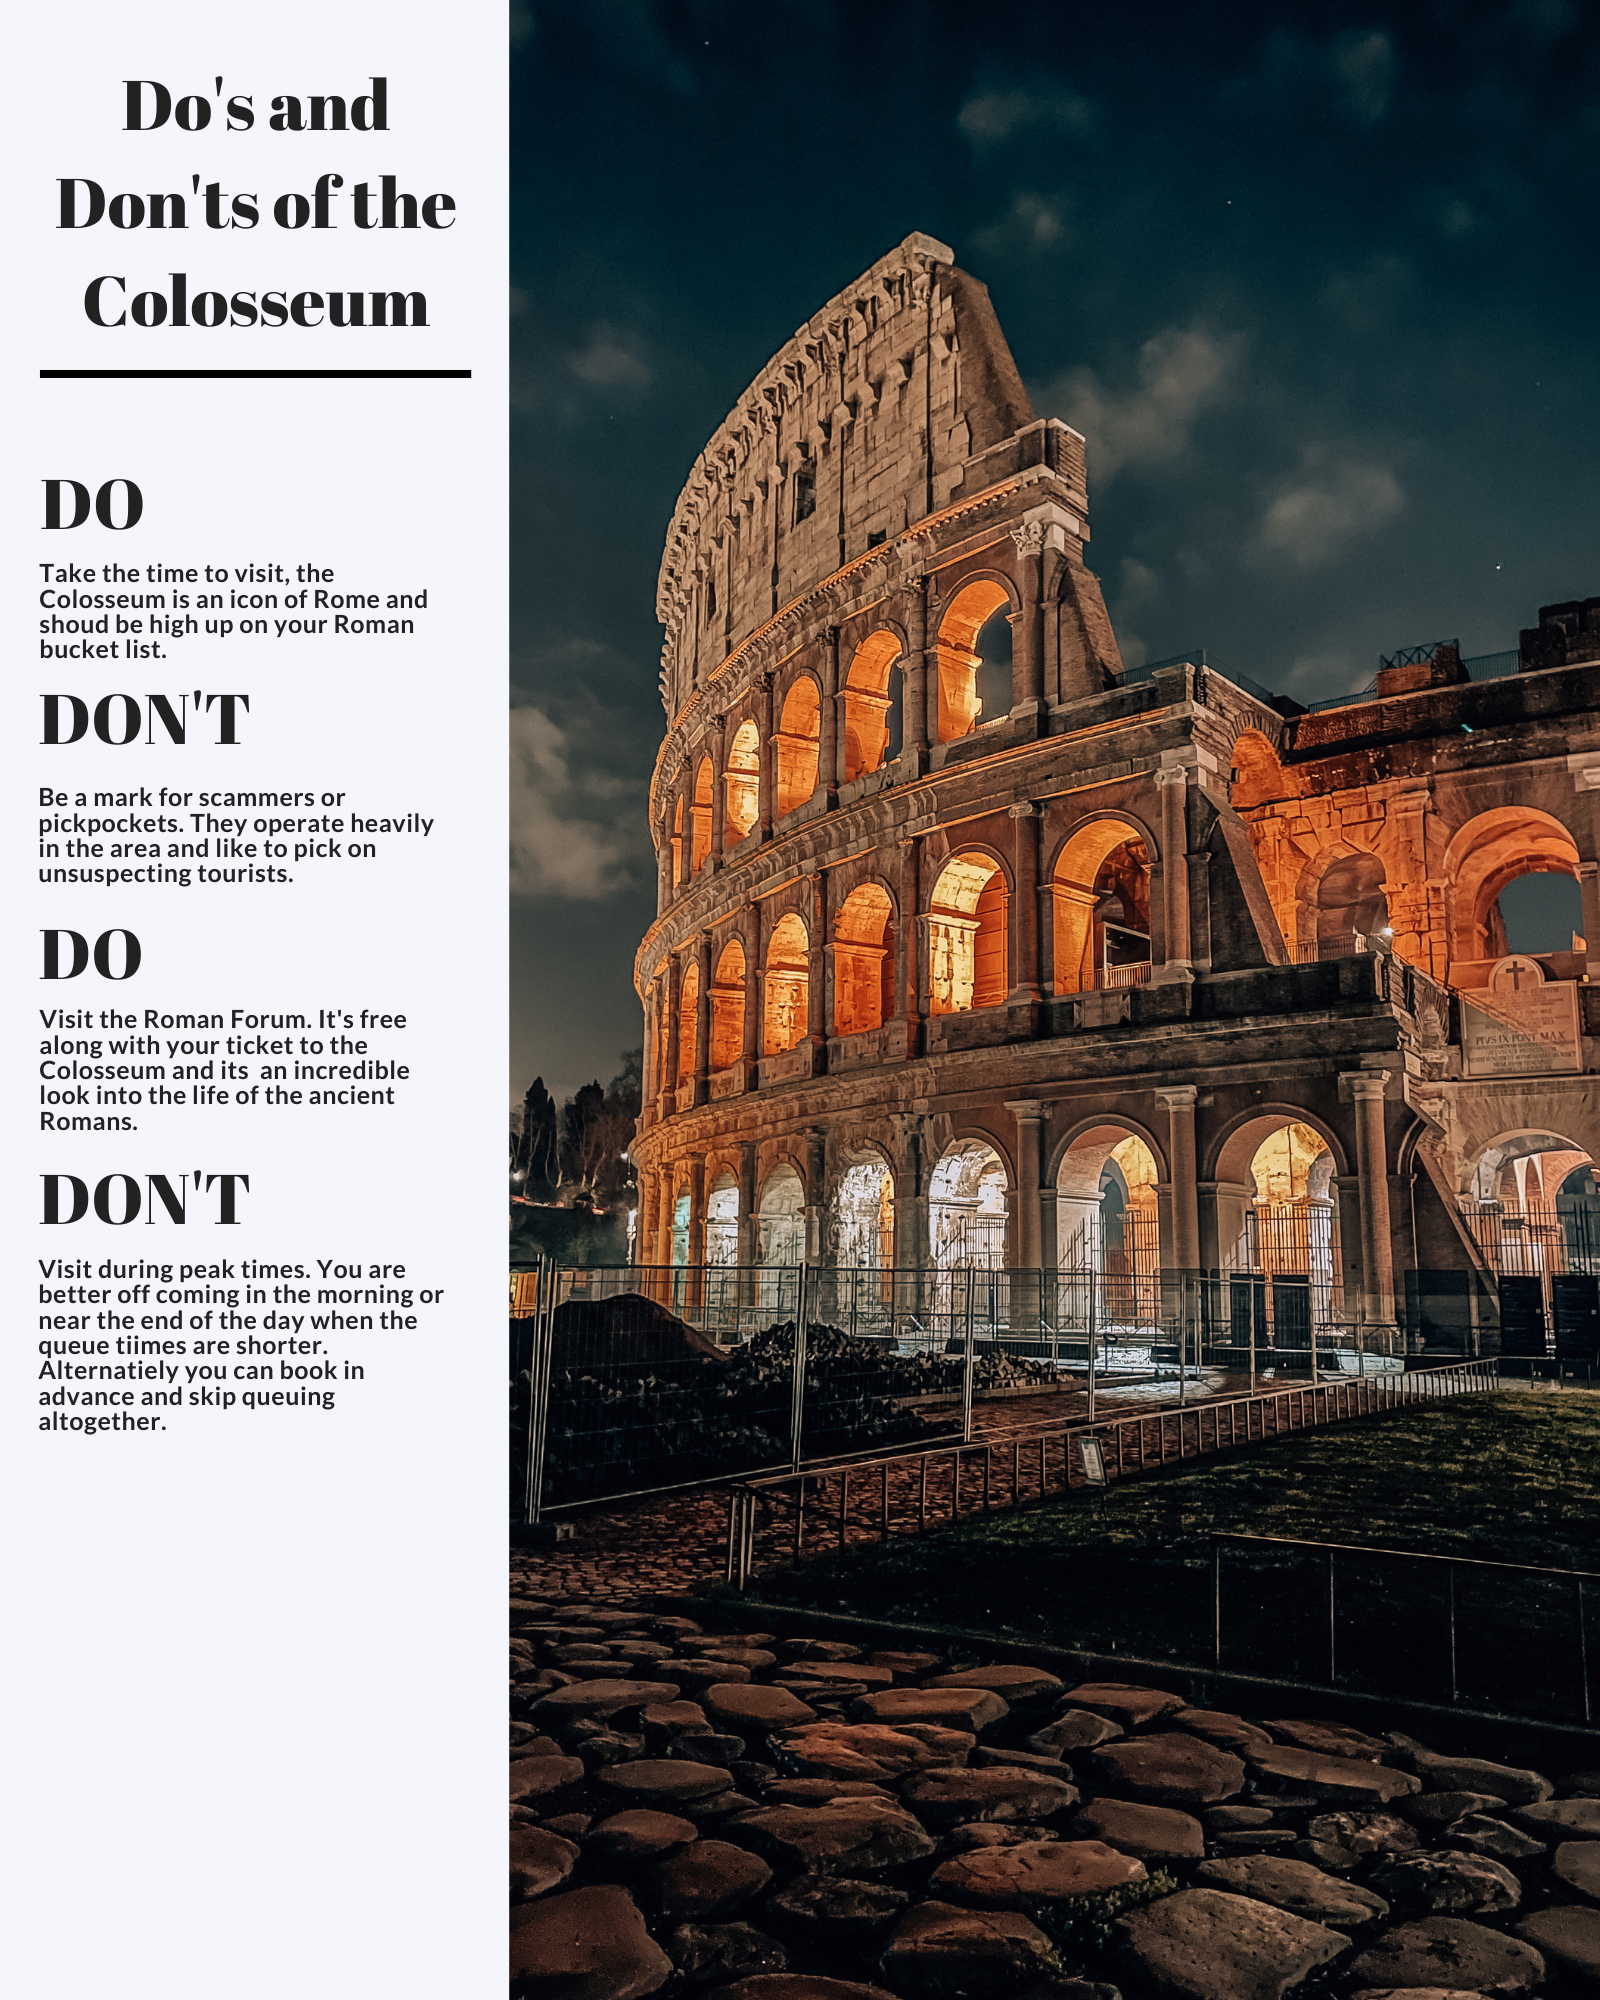 Do and Don'ts Guide in Rome, Italy